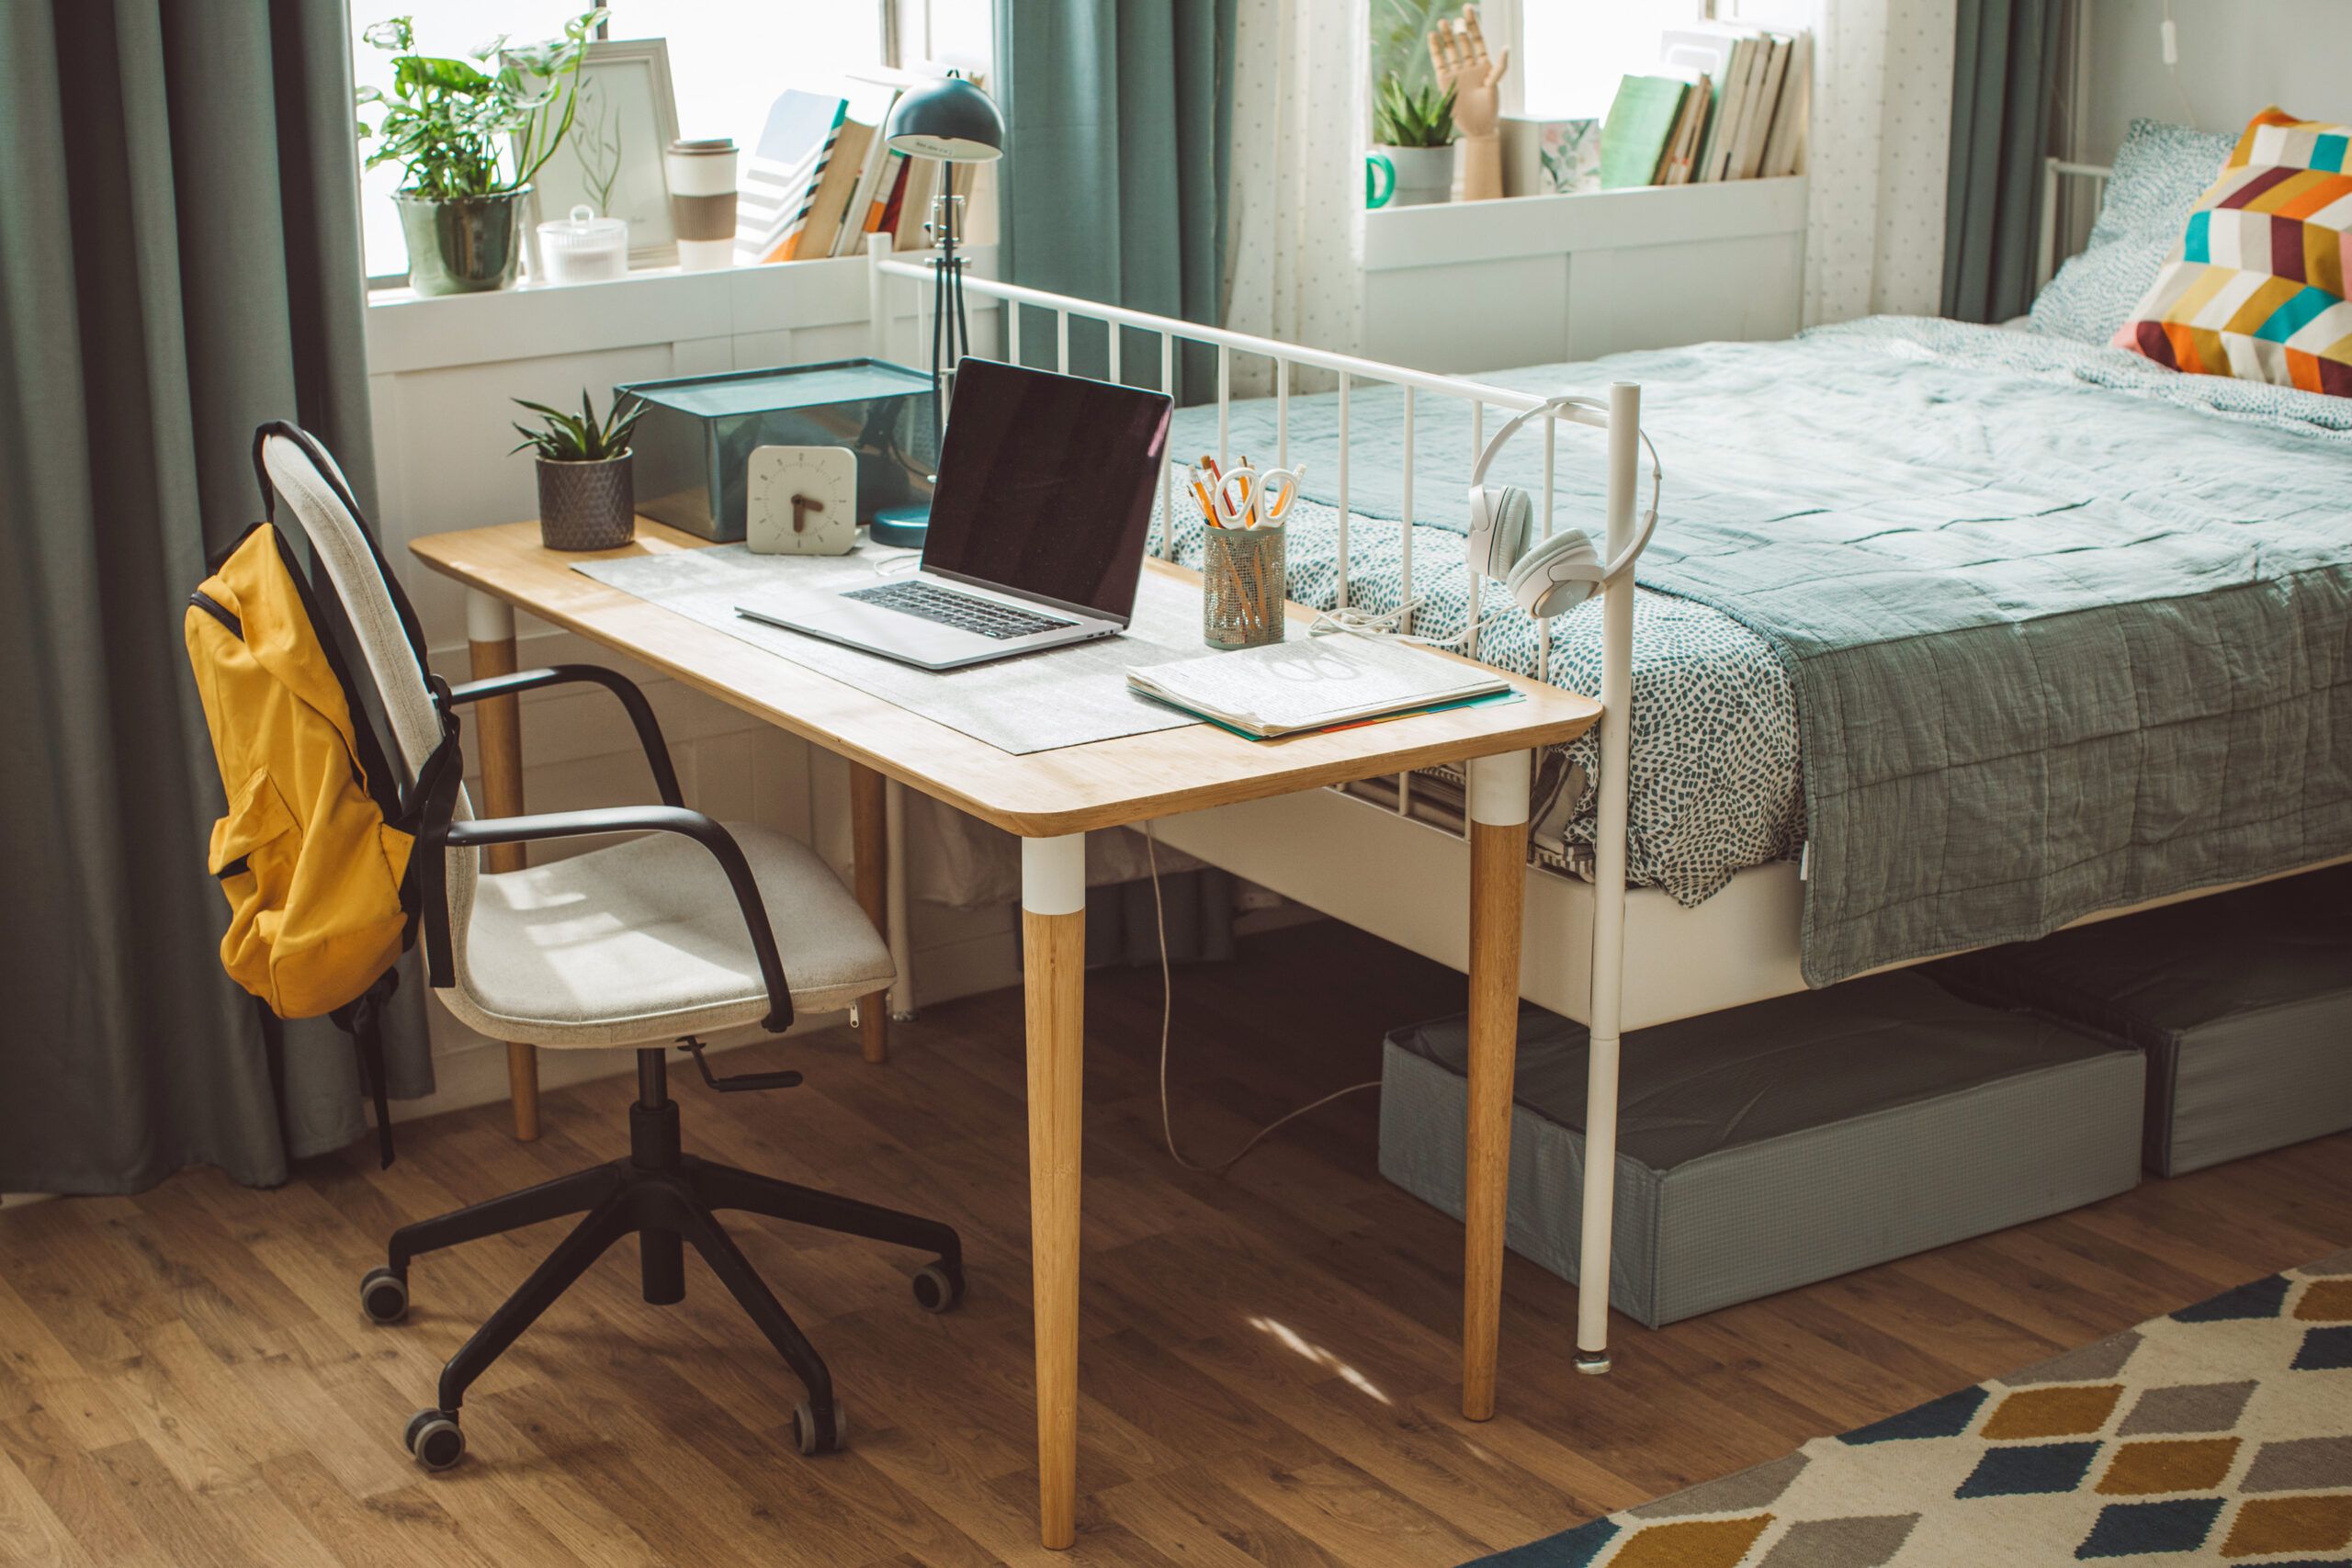 Lifestyle image of a dorm rooms with a bed, wooden writing desk, yellow backpack, chair, and laptop